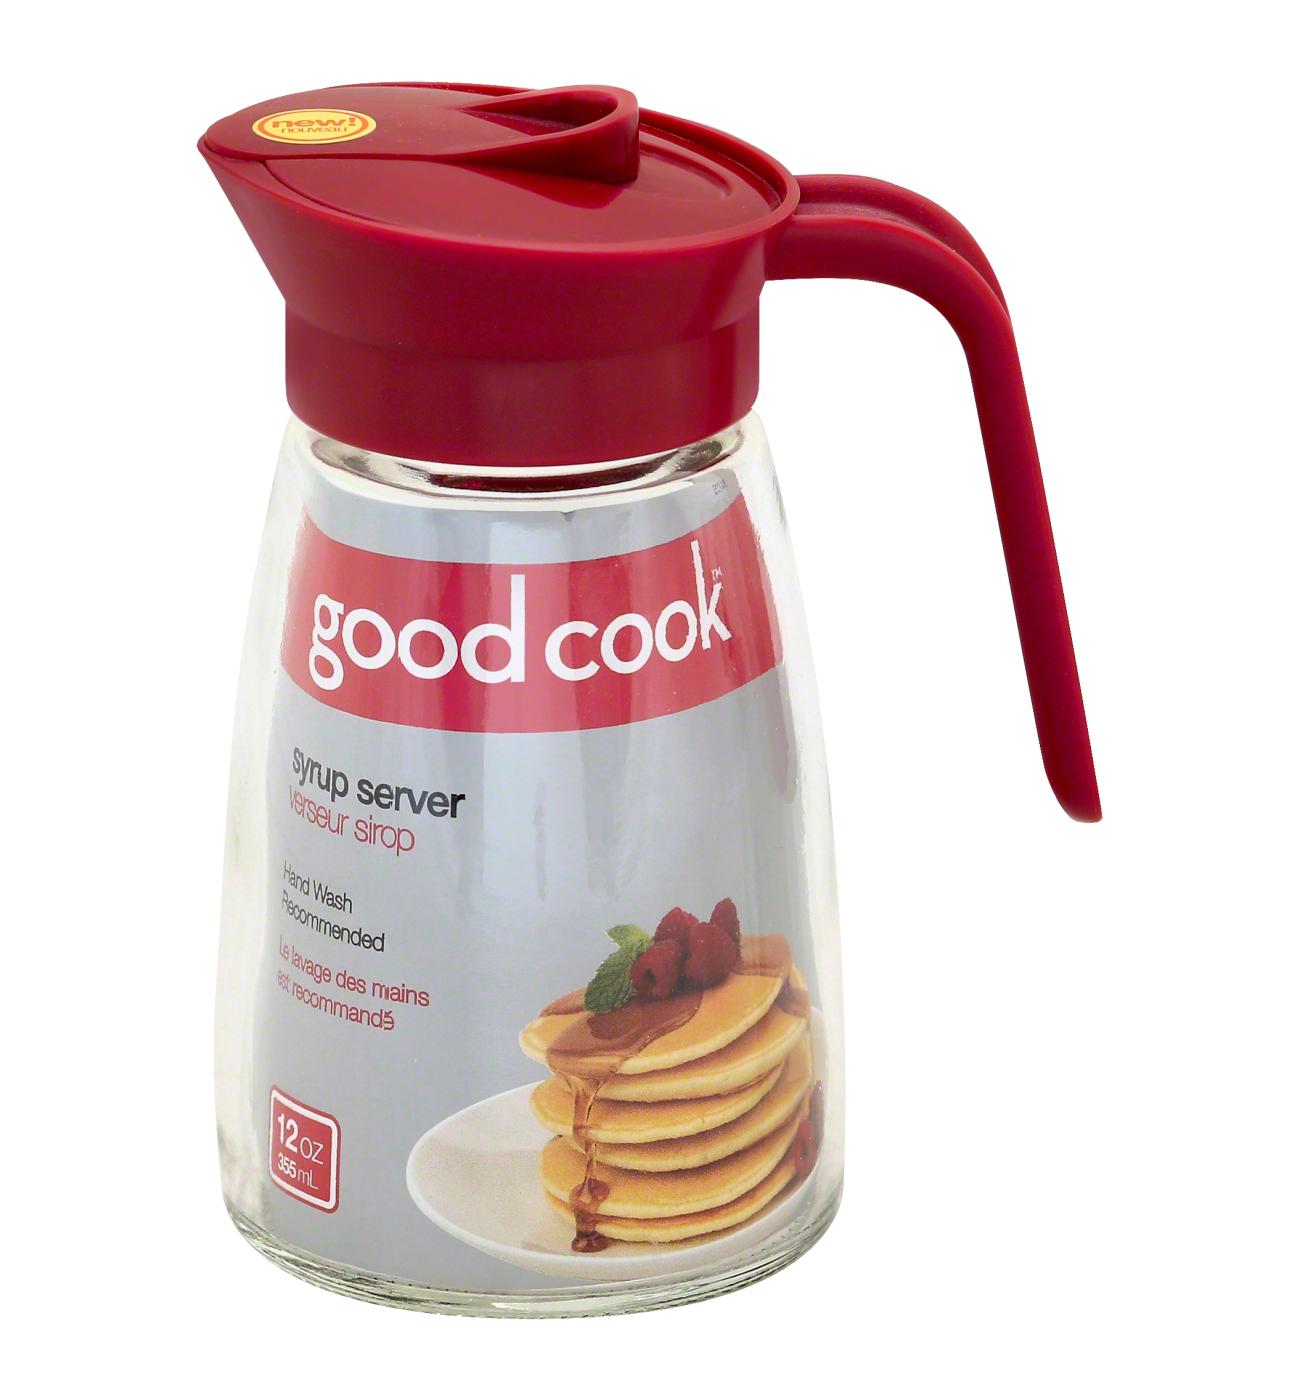 GoodCook Everyday Syrup Dispenser; image 1 of 3